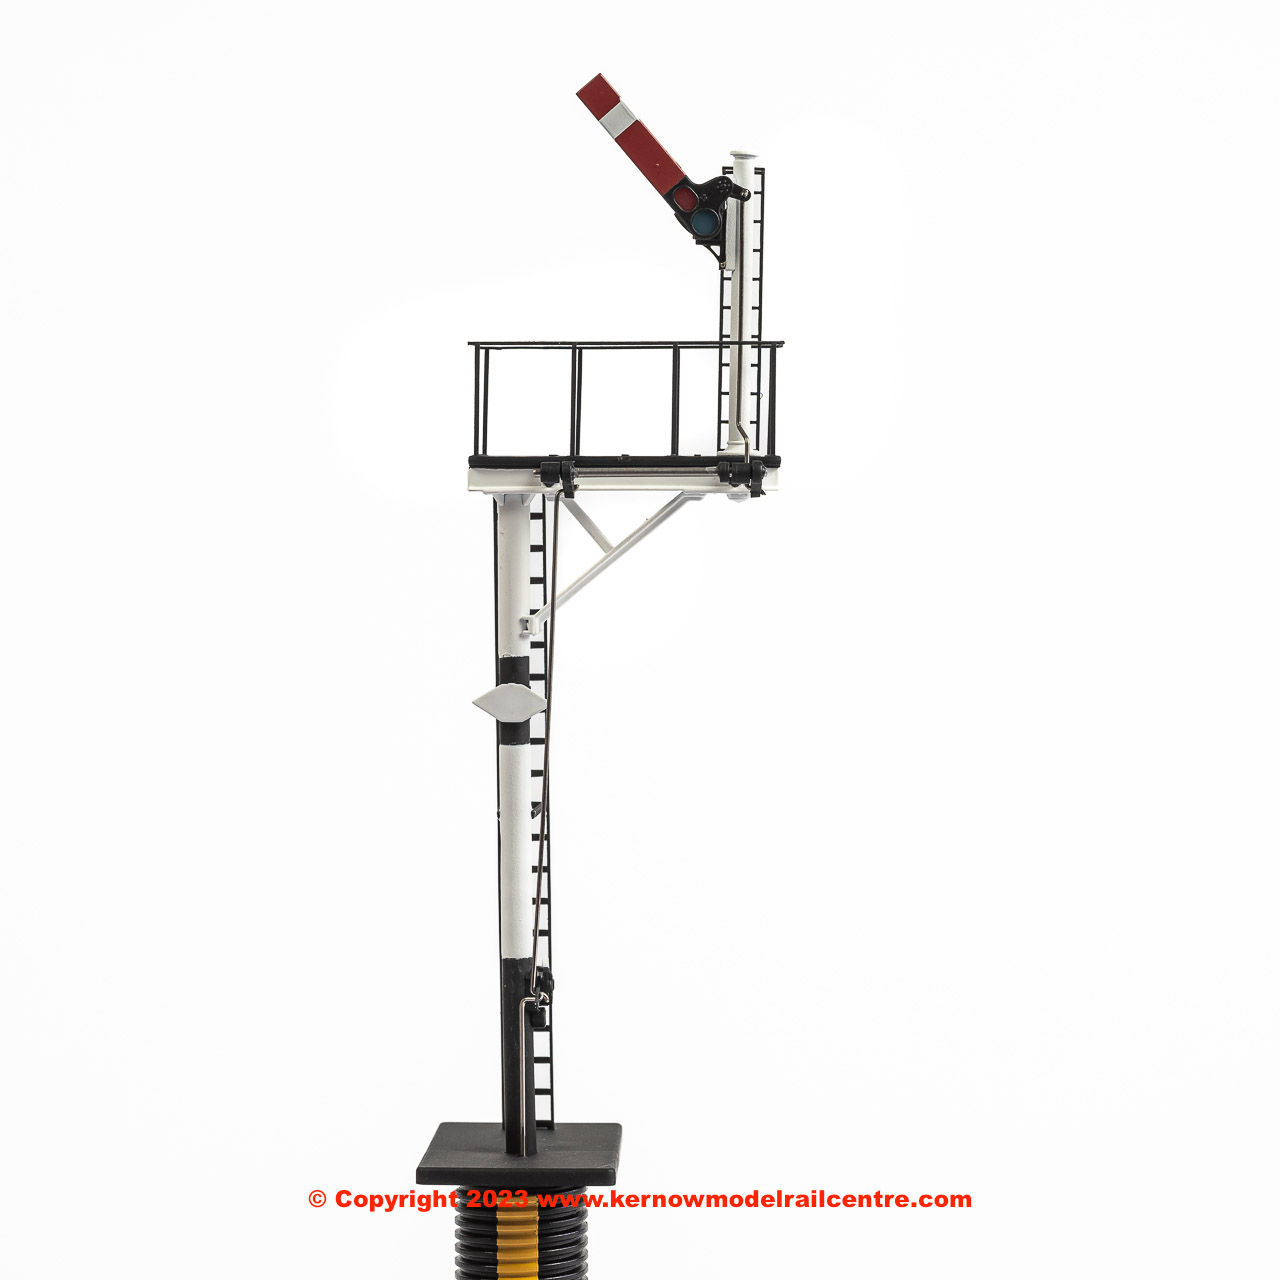 4L-002-005 Dapol LMS Bracket Signal with one arm - right hand